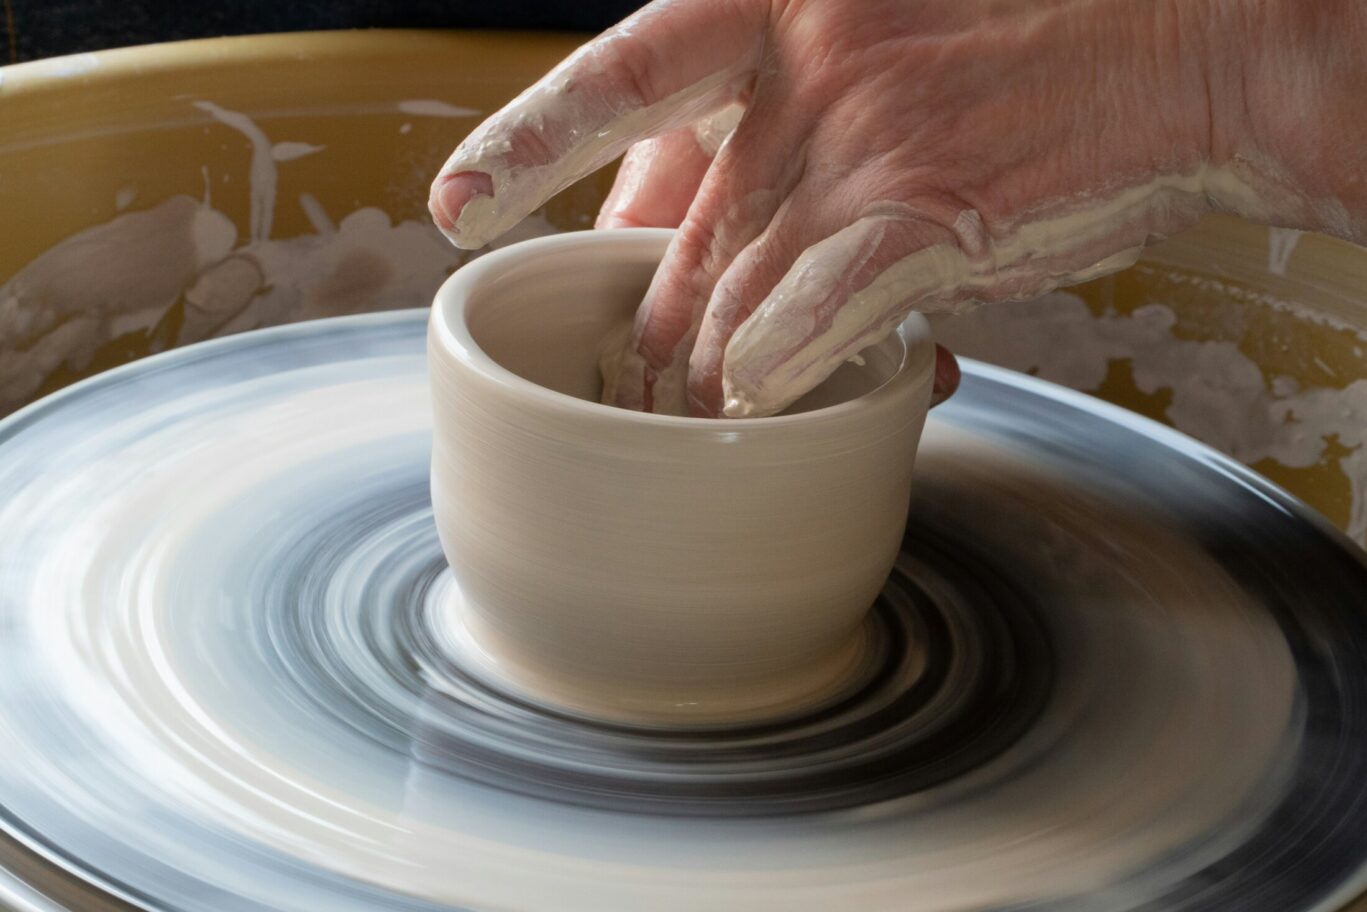 Pottery session